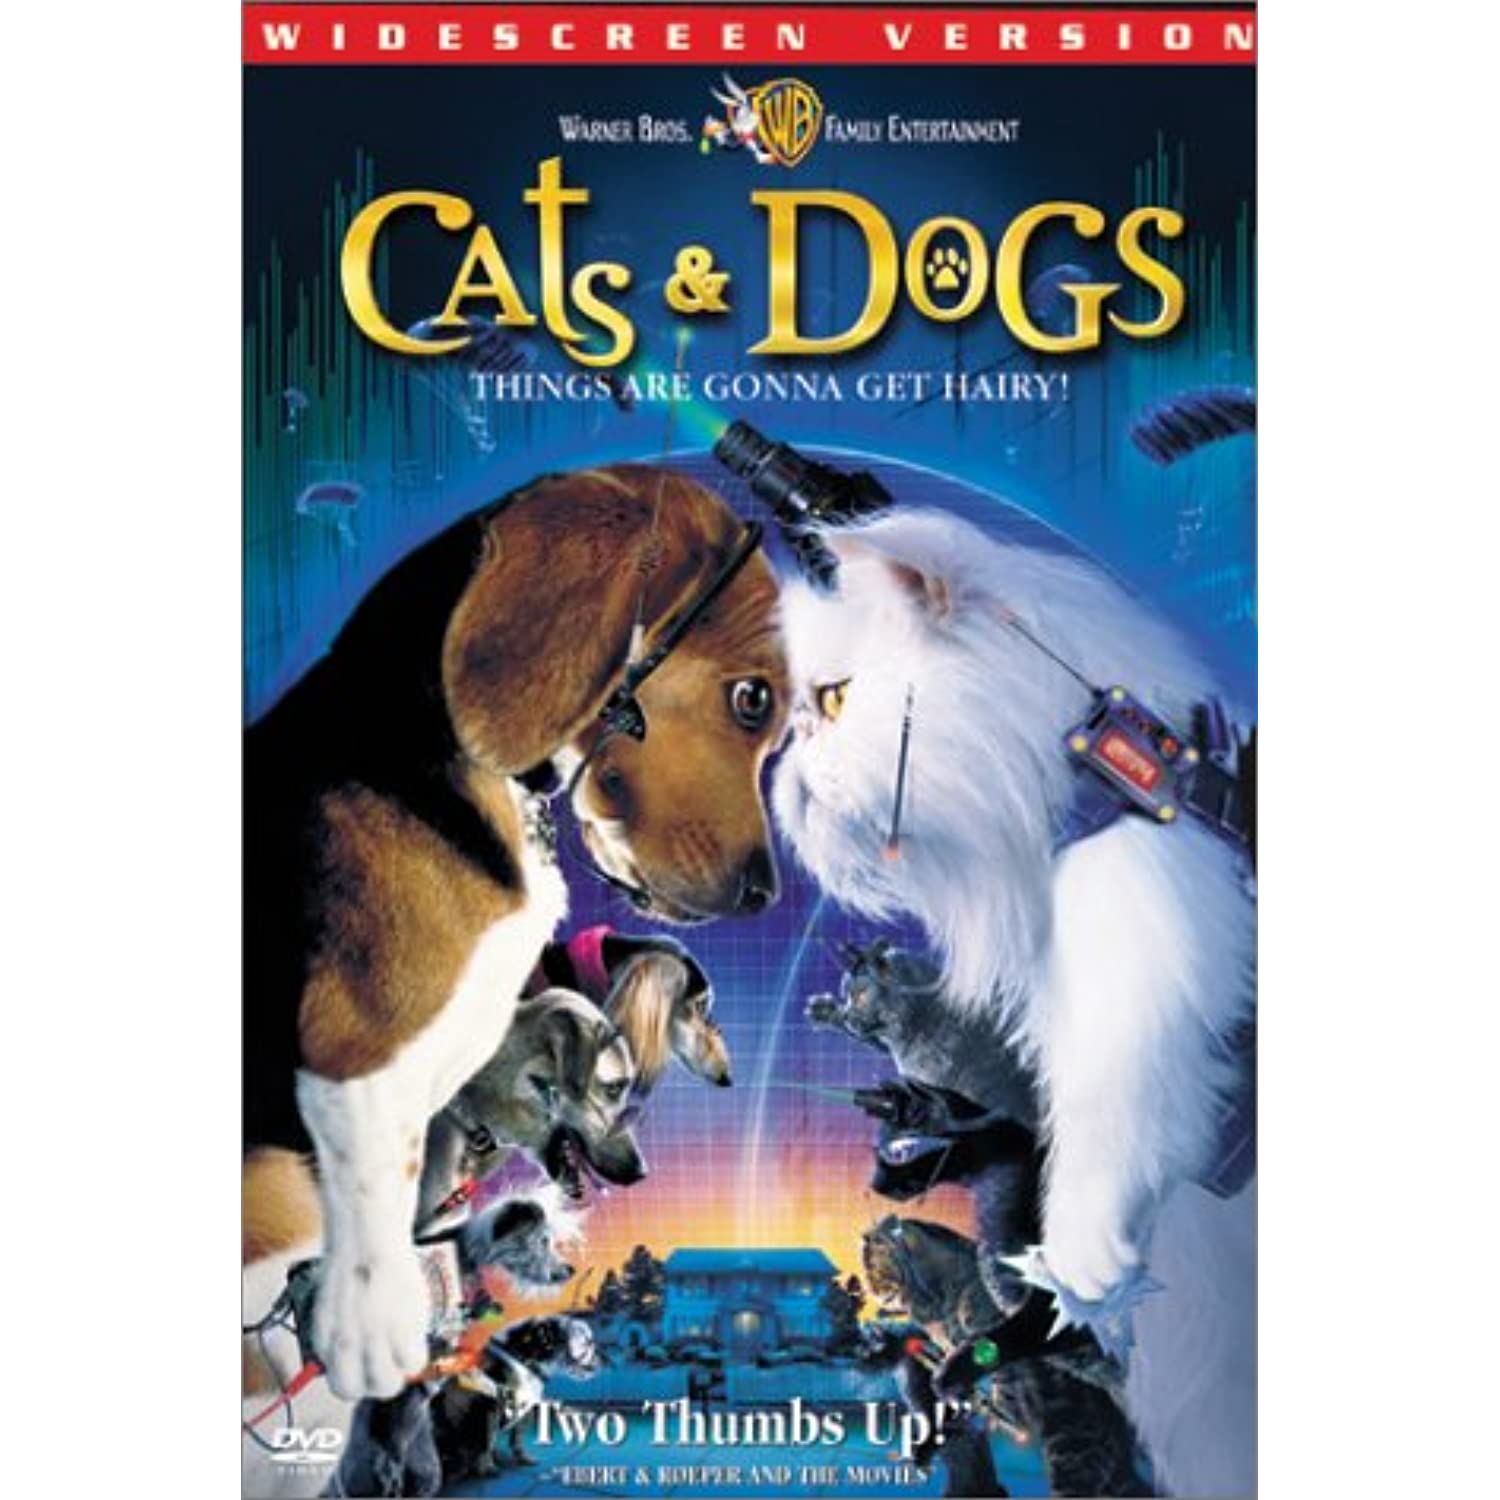 Cats & Dogs (Widescreen Edition) DVD